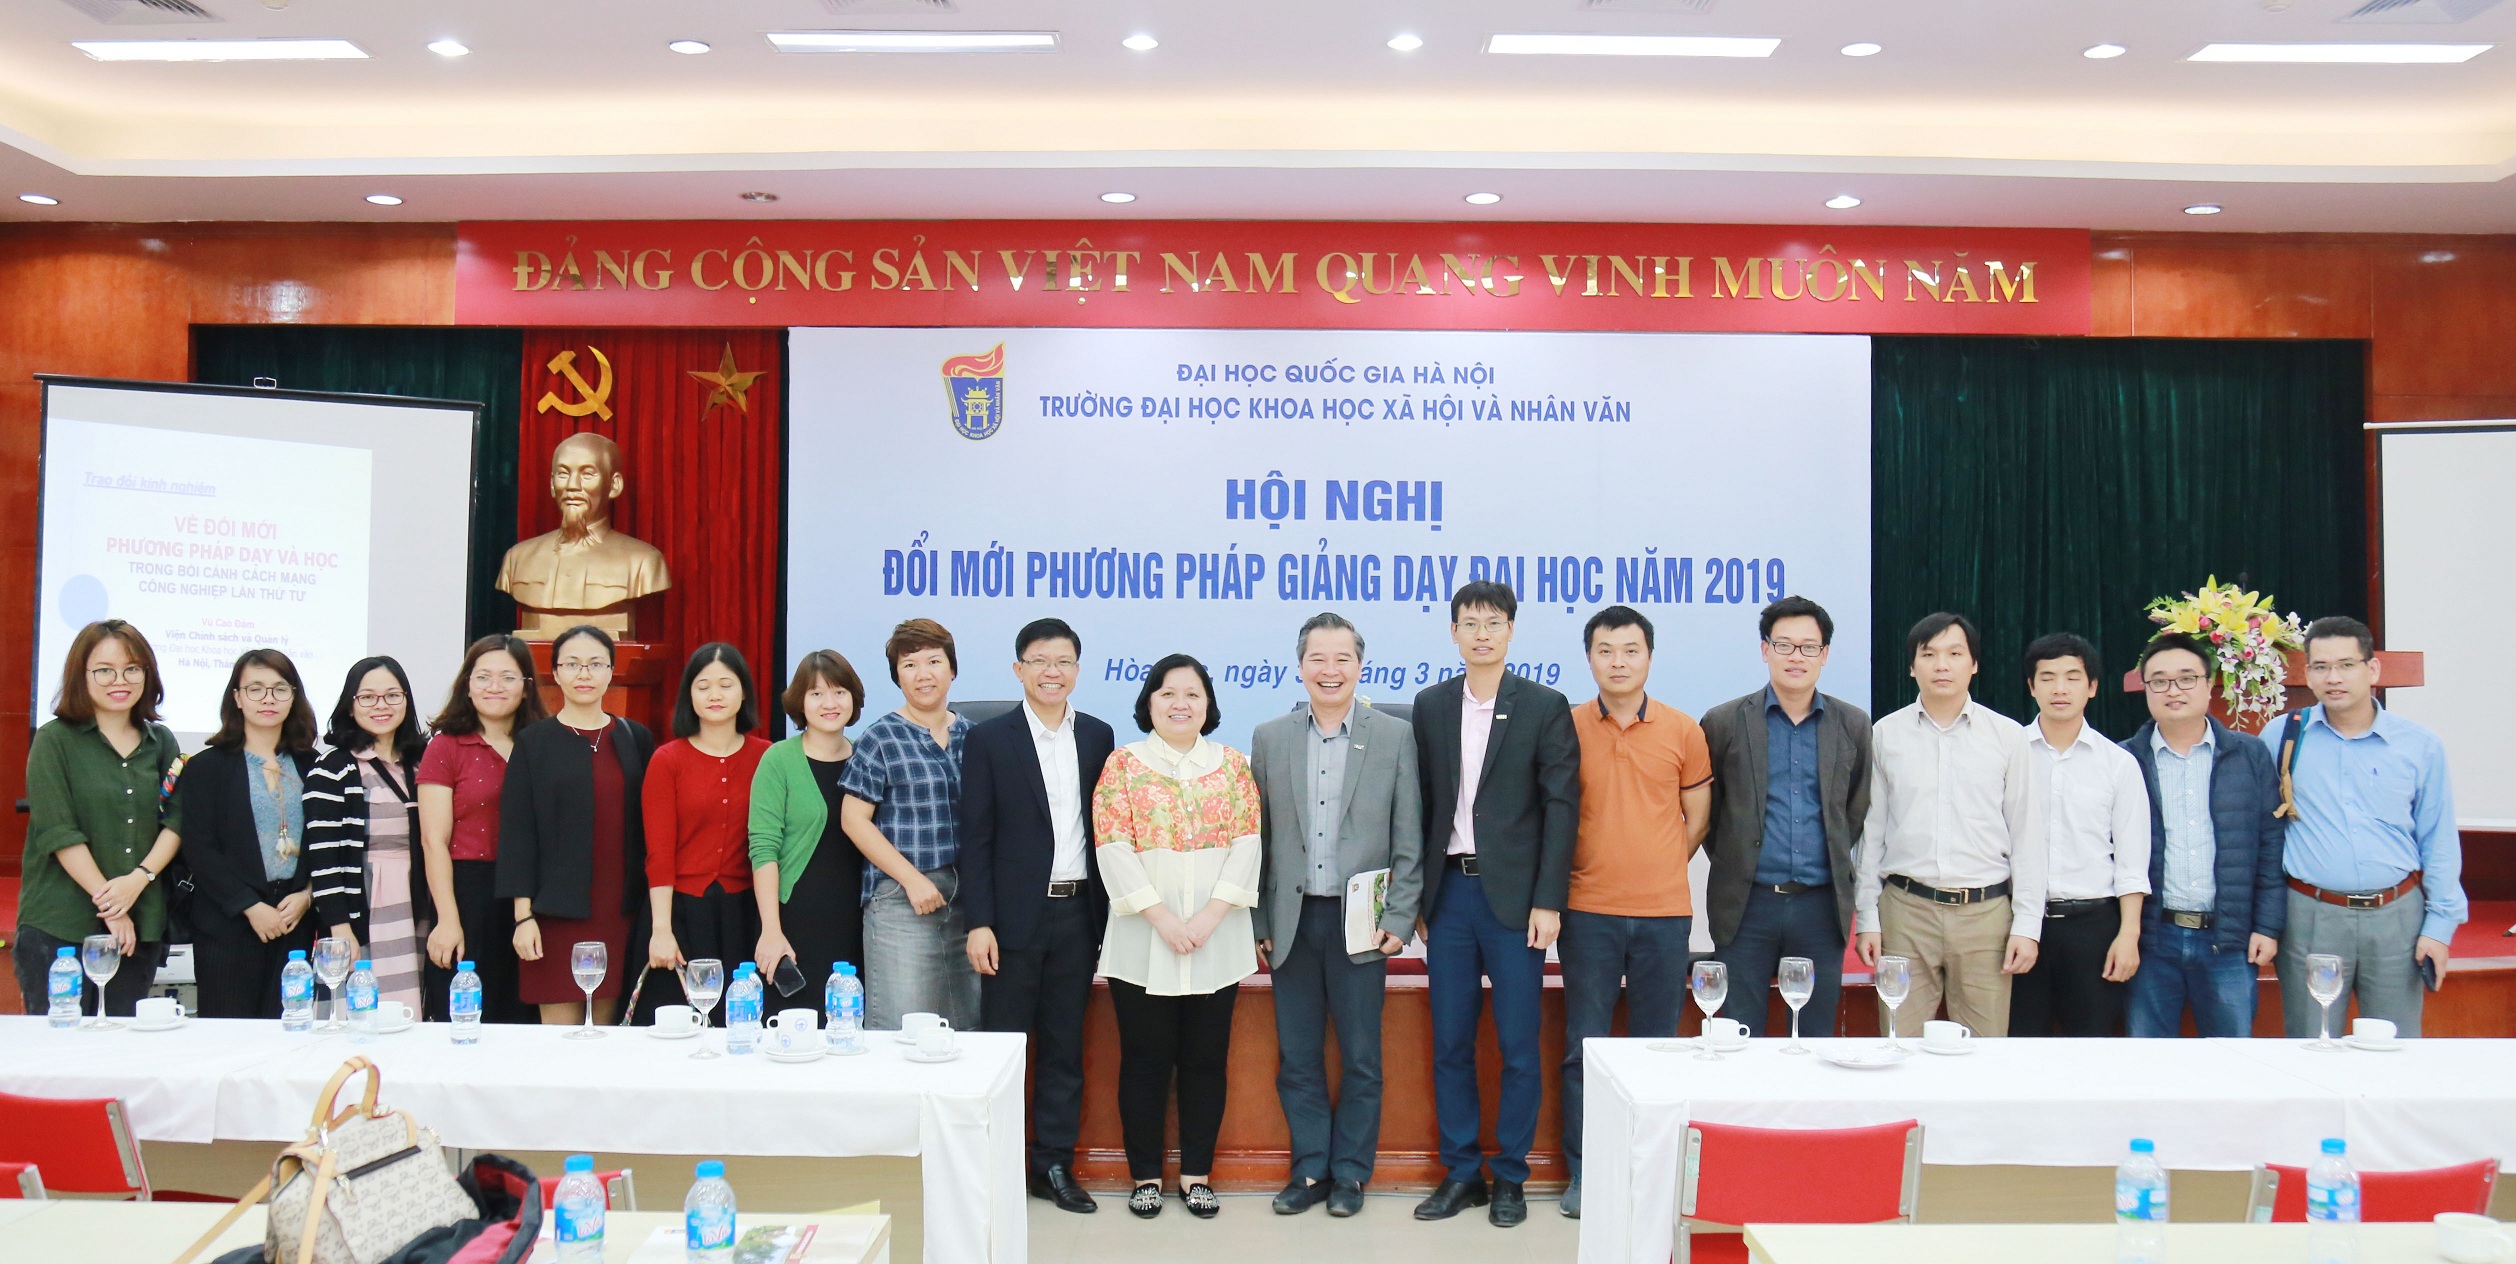 Prof.Dr Pham Quang Minh: “I gained the inspiration of innovation from the teachers themselves…”